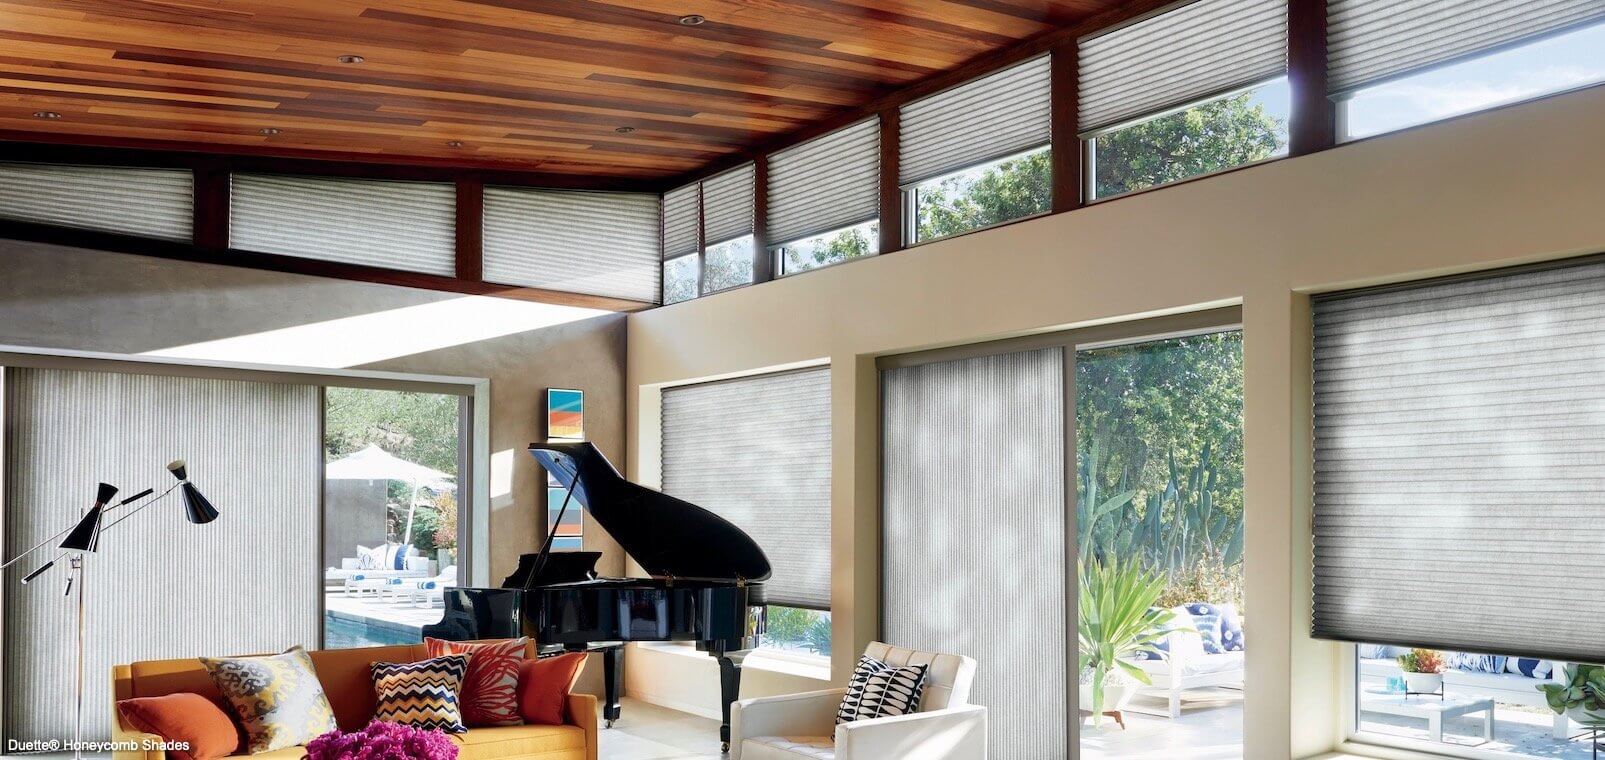 Duette Honeycomb Shades - PowerView- Trielle - Great Room